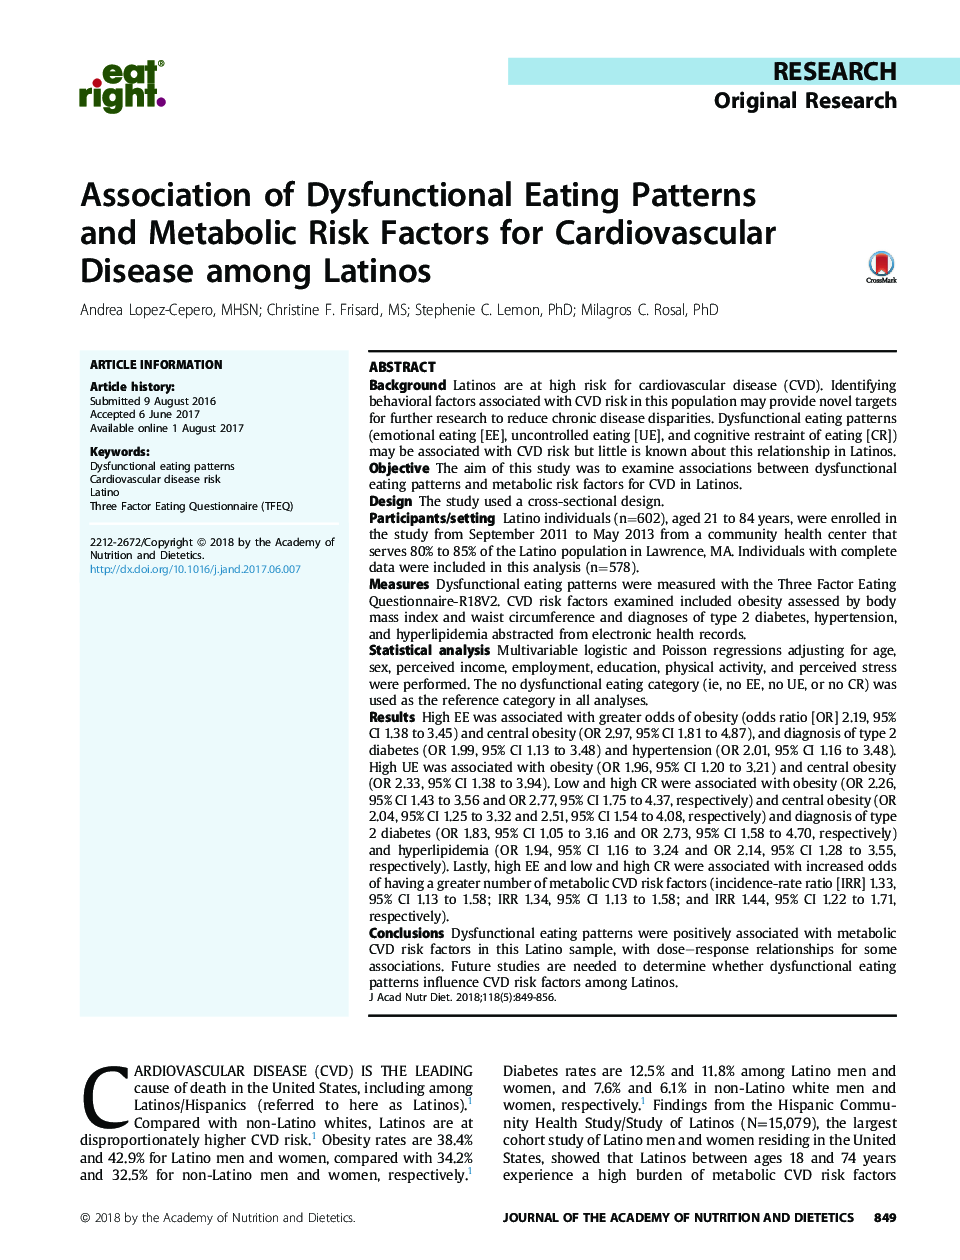 Association of Dysfunctional Eating Patterns and Metabolic Risk Factors for Cardiovascular Disease among Latinos